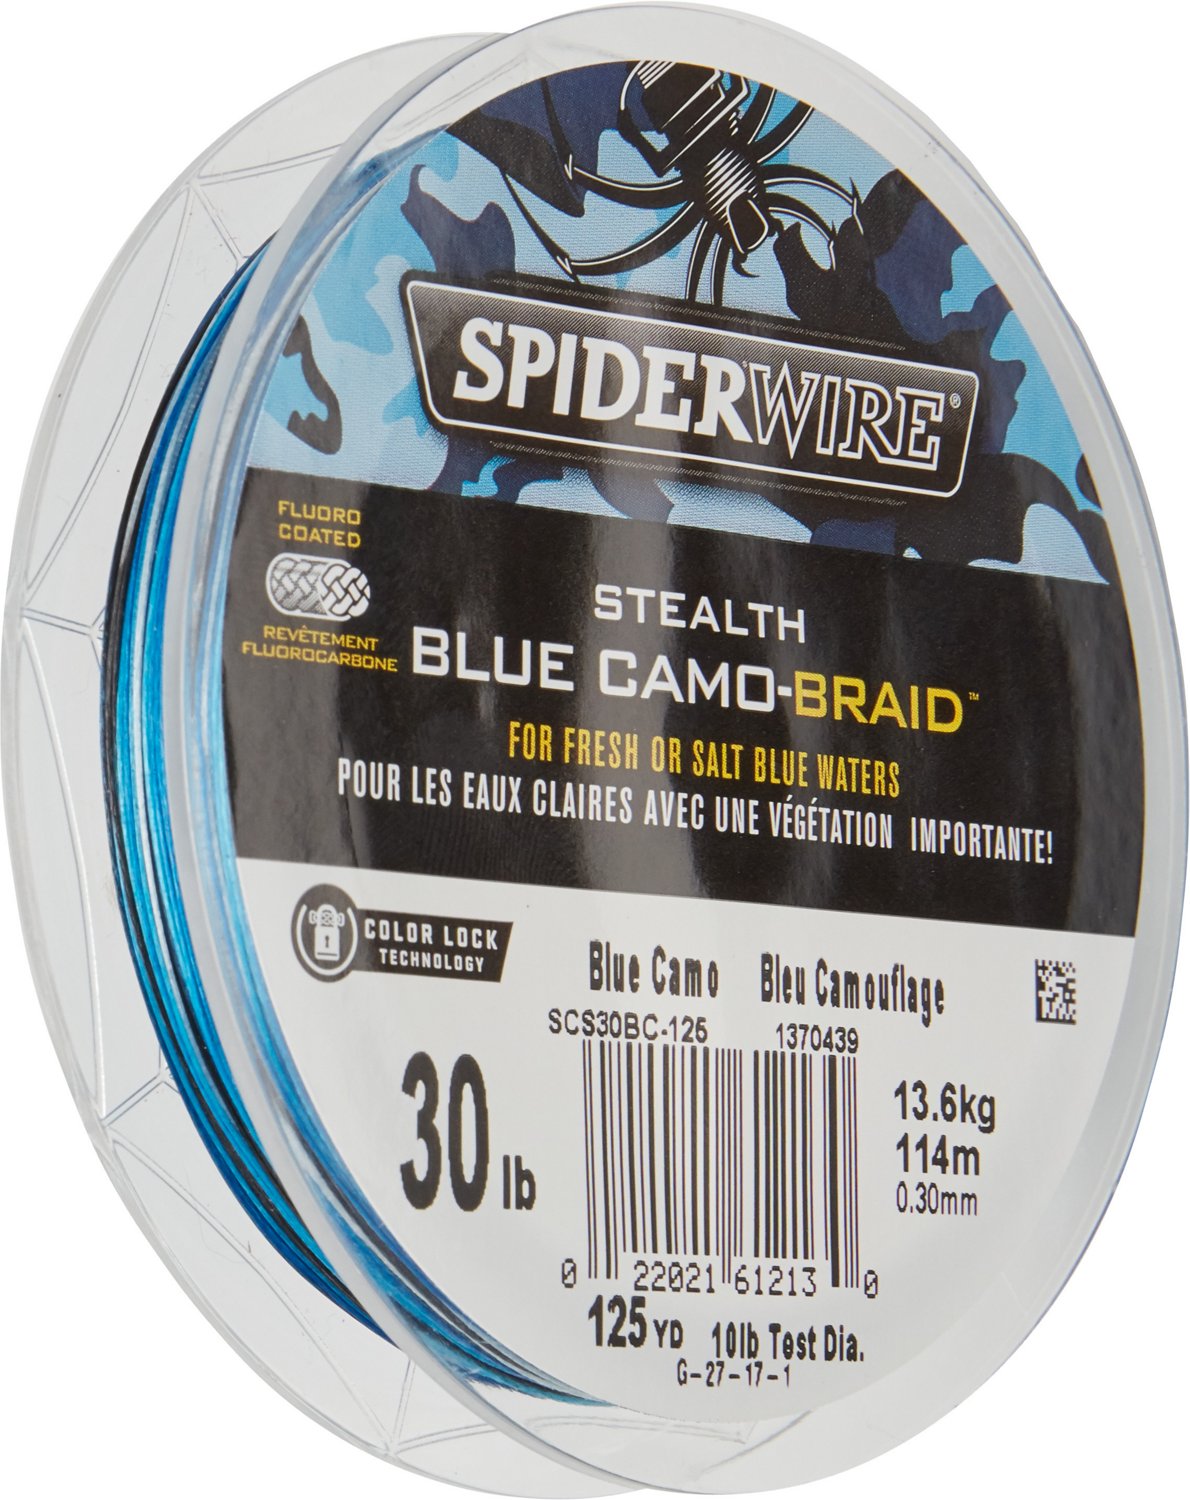 SpiderWire Stealth-Braid Moss Green Enhanced Fishing Line (Select # Test)  125yd